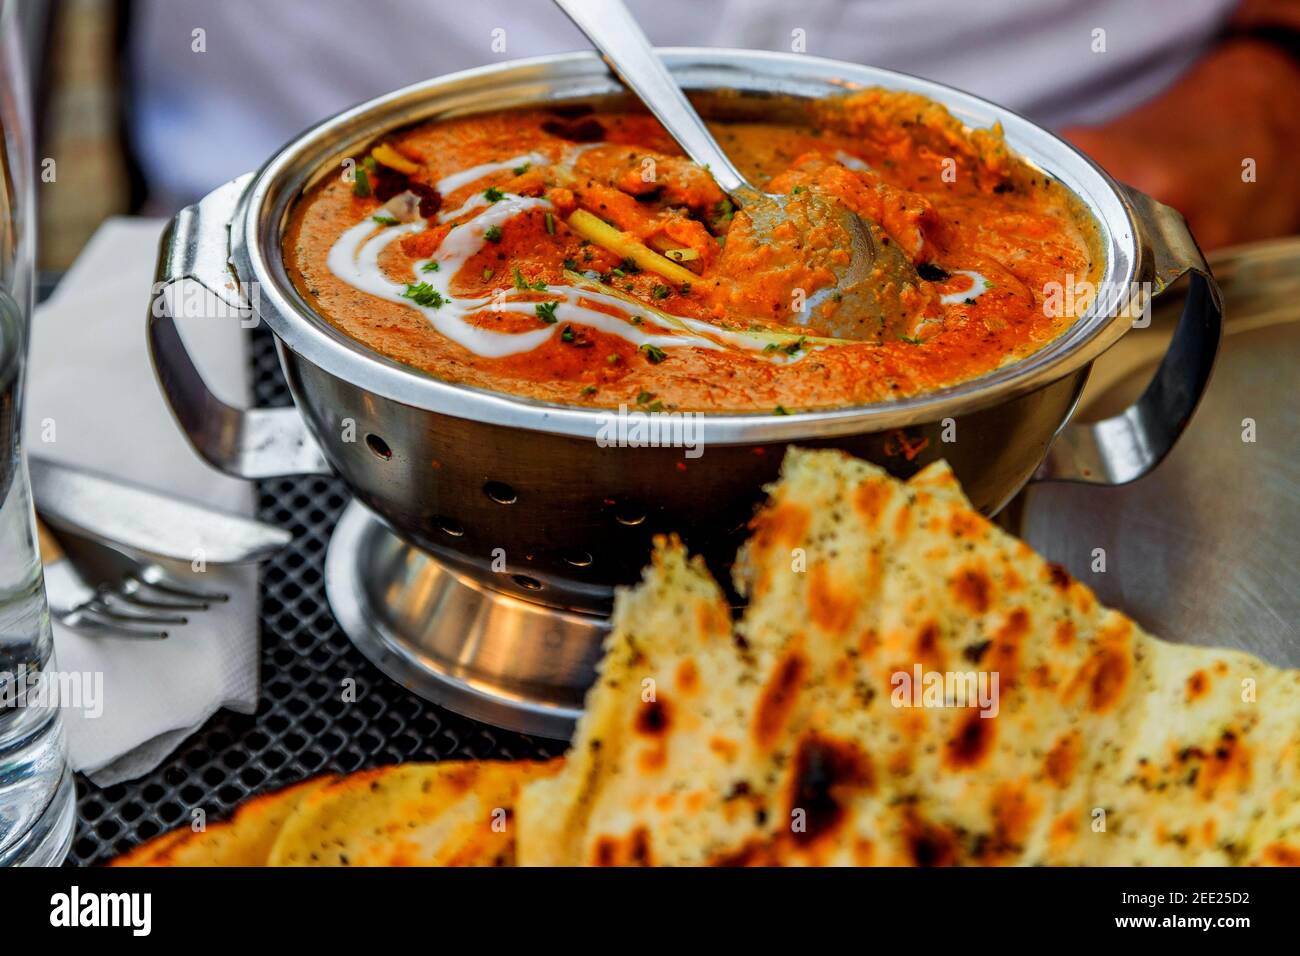 Bowl with indian meal chicken tikka masala, bread (butter naan), part of person at the table. Stock Photo